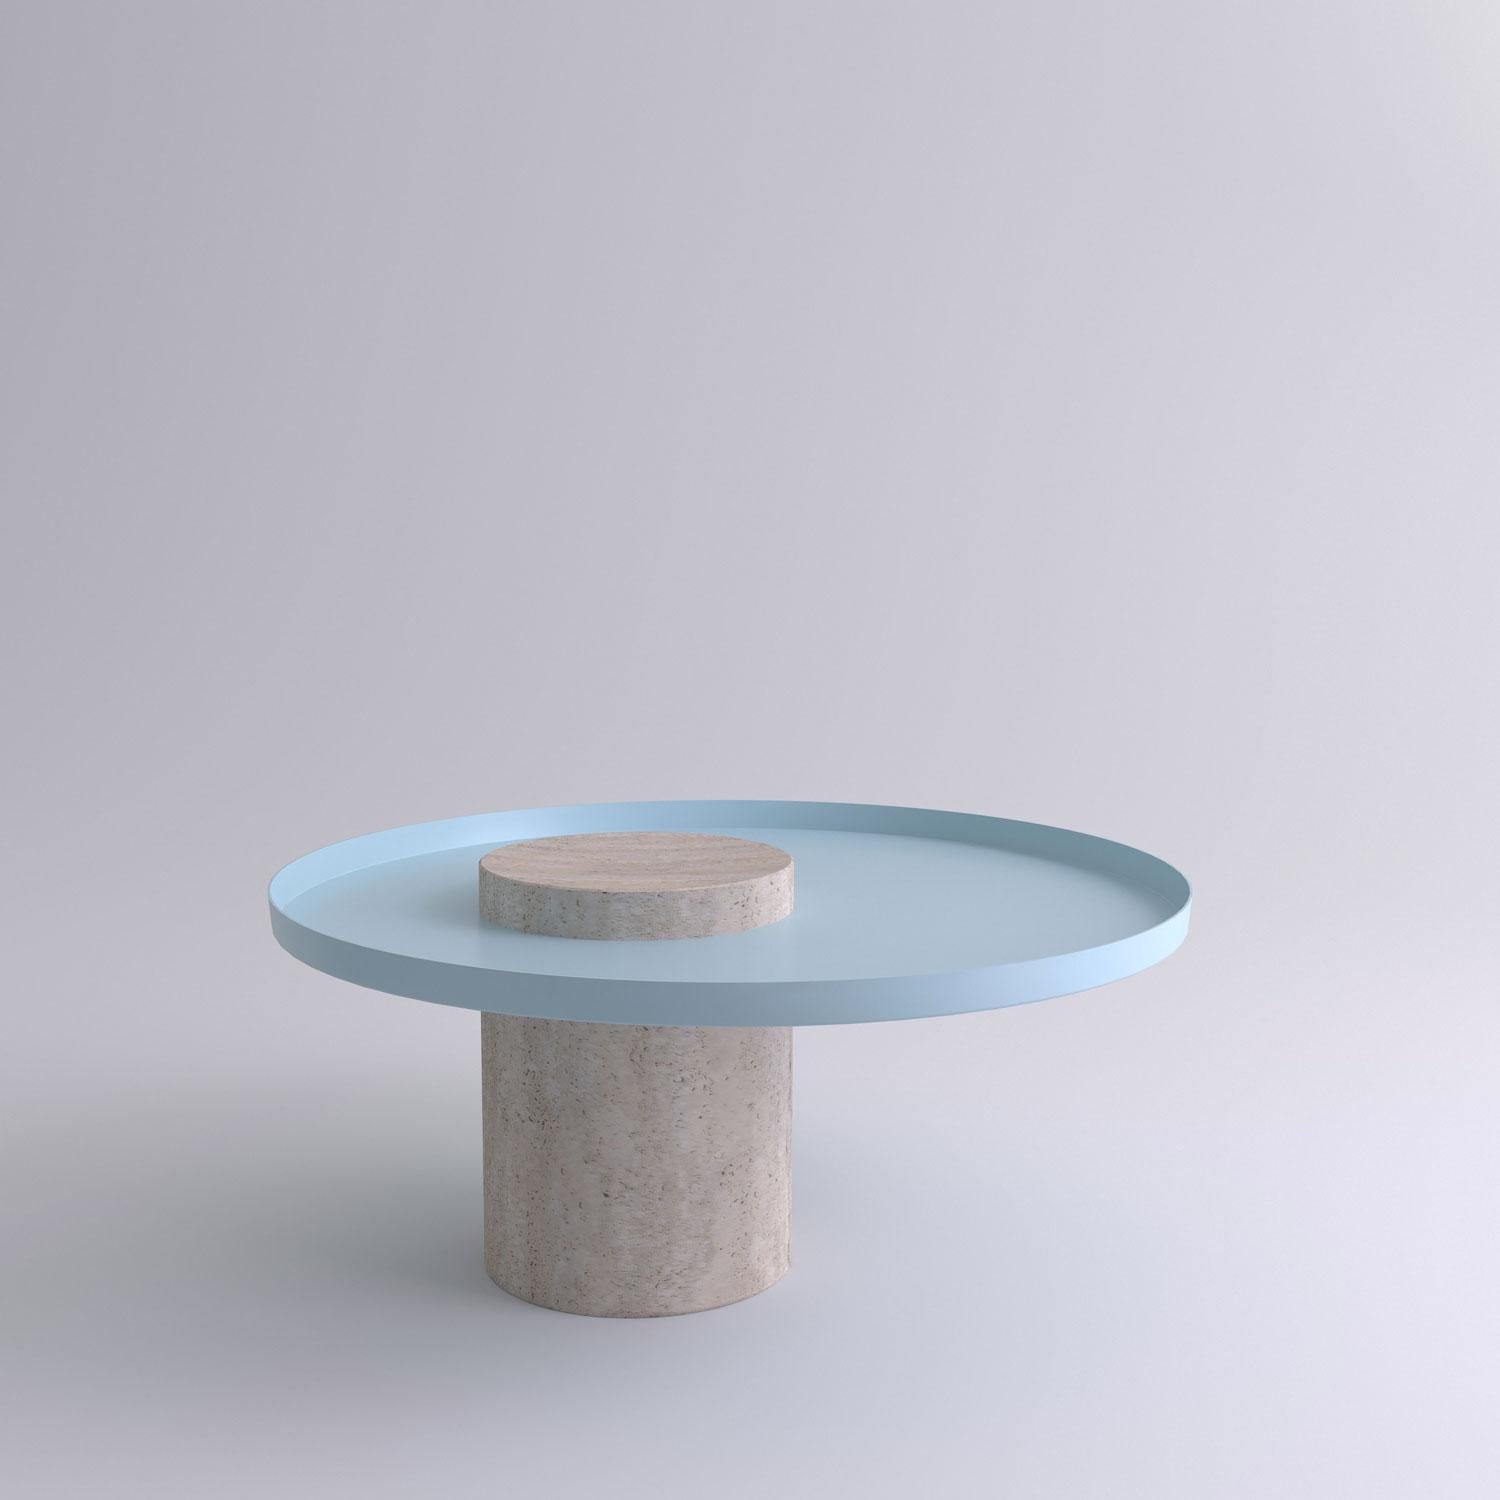 Low travertine contemporary guéridon, Sebastian Herkner
Dimensions: D 70 x H 33 cm
Materials: Travertine stone, light blue metal tray

The salute table exists in 3 sizes, 4 different marble stones for the column and 5 different finishes for the